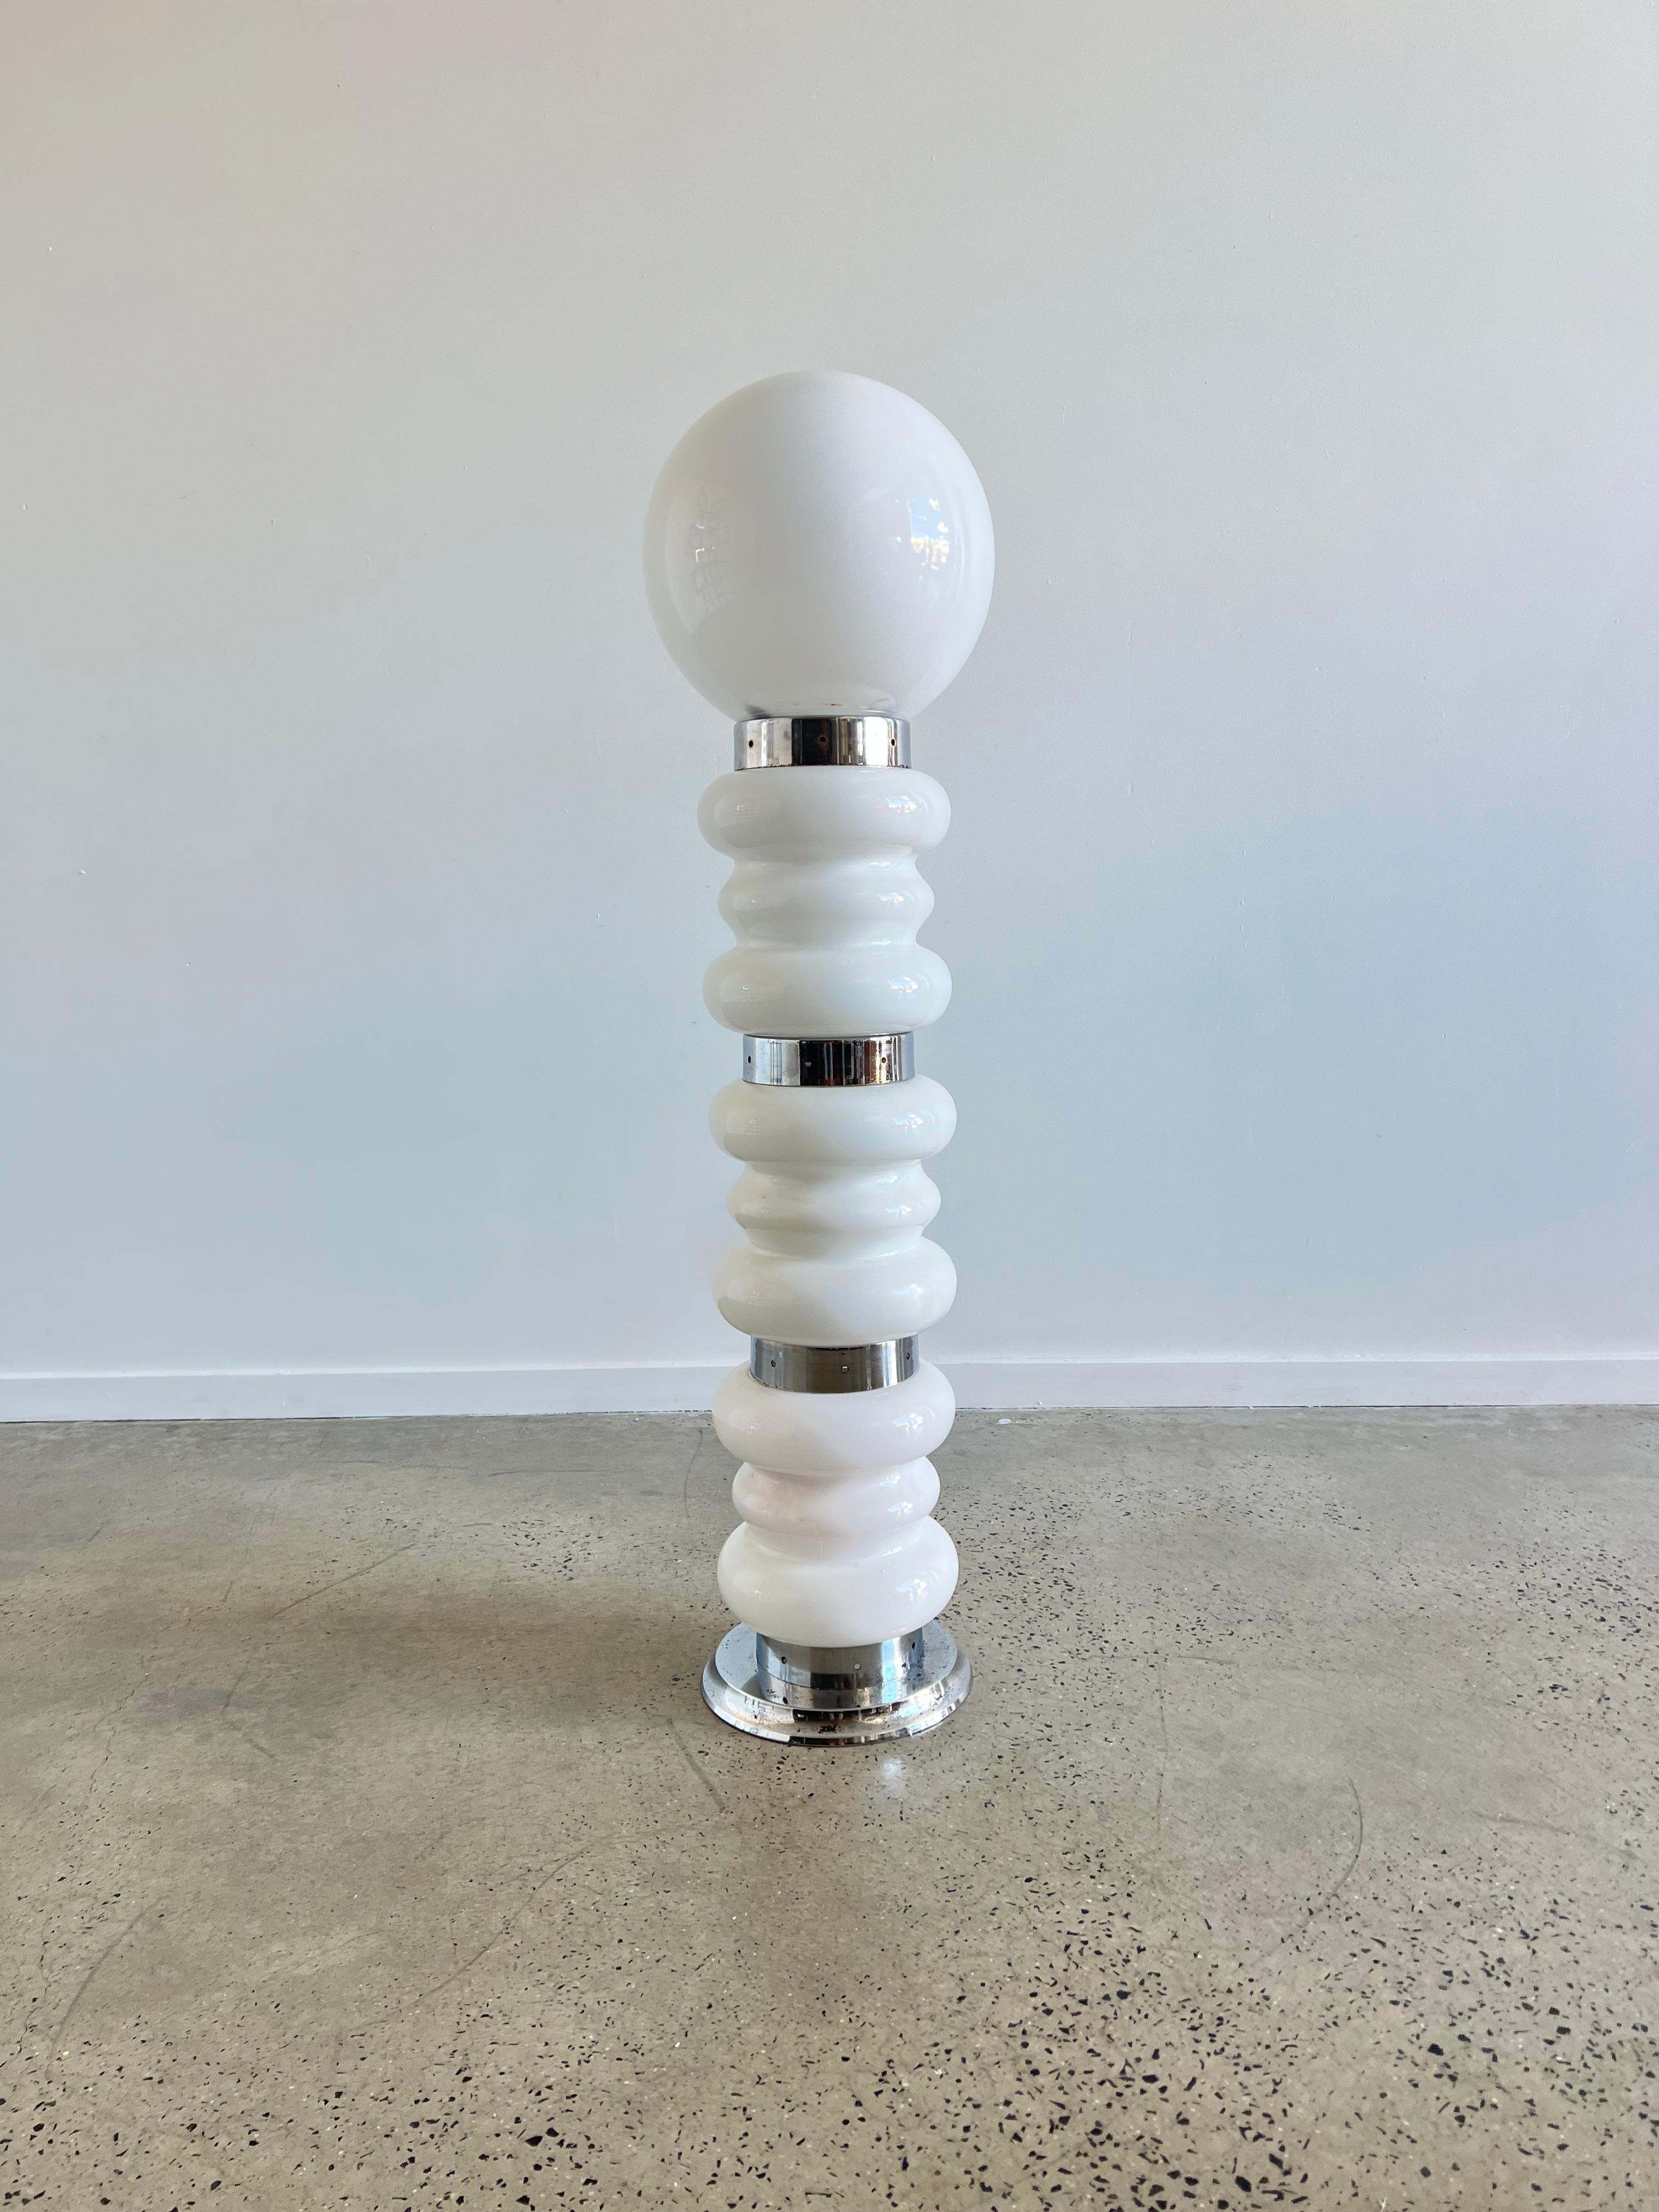 Timeless floor lamp by Carlo Nason for Mazzega.
Beautiful space age white colour with a white Murano glass. The entire lamp is made out of glass with chromed centre pieces.
Good condition, tested and ready to use.